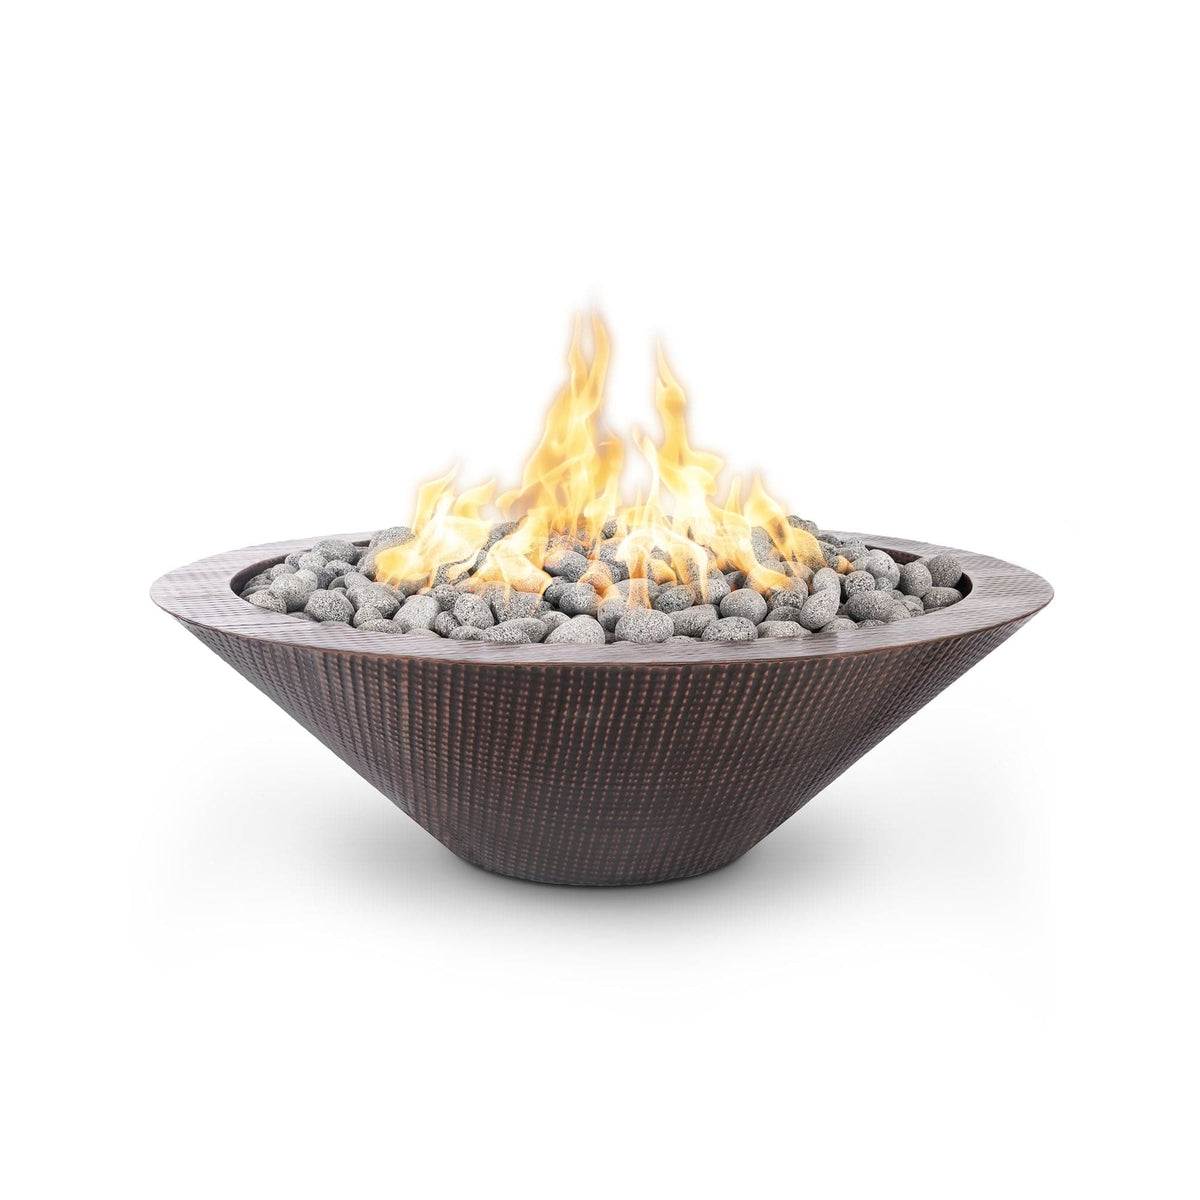 The Outdoor Plus Fire Features The Outdoor Plus 48&quot; Round Cazo Copper Narrow Ledge Fire Pit / OPT-RHC48, OPT-RHC48FSML, OPT-RHC48FSEN, OPT-RHC48E12V, OPT-RHC48EKIT